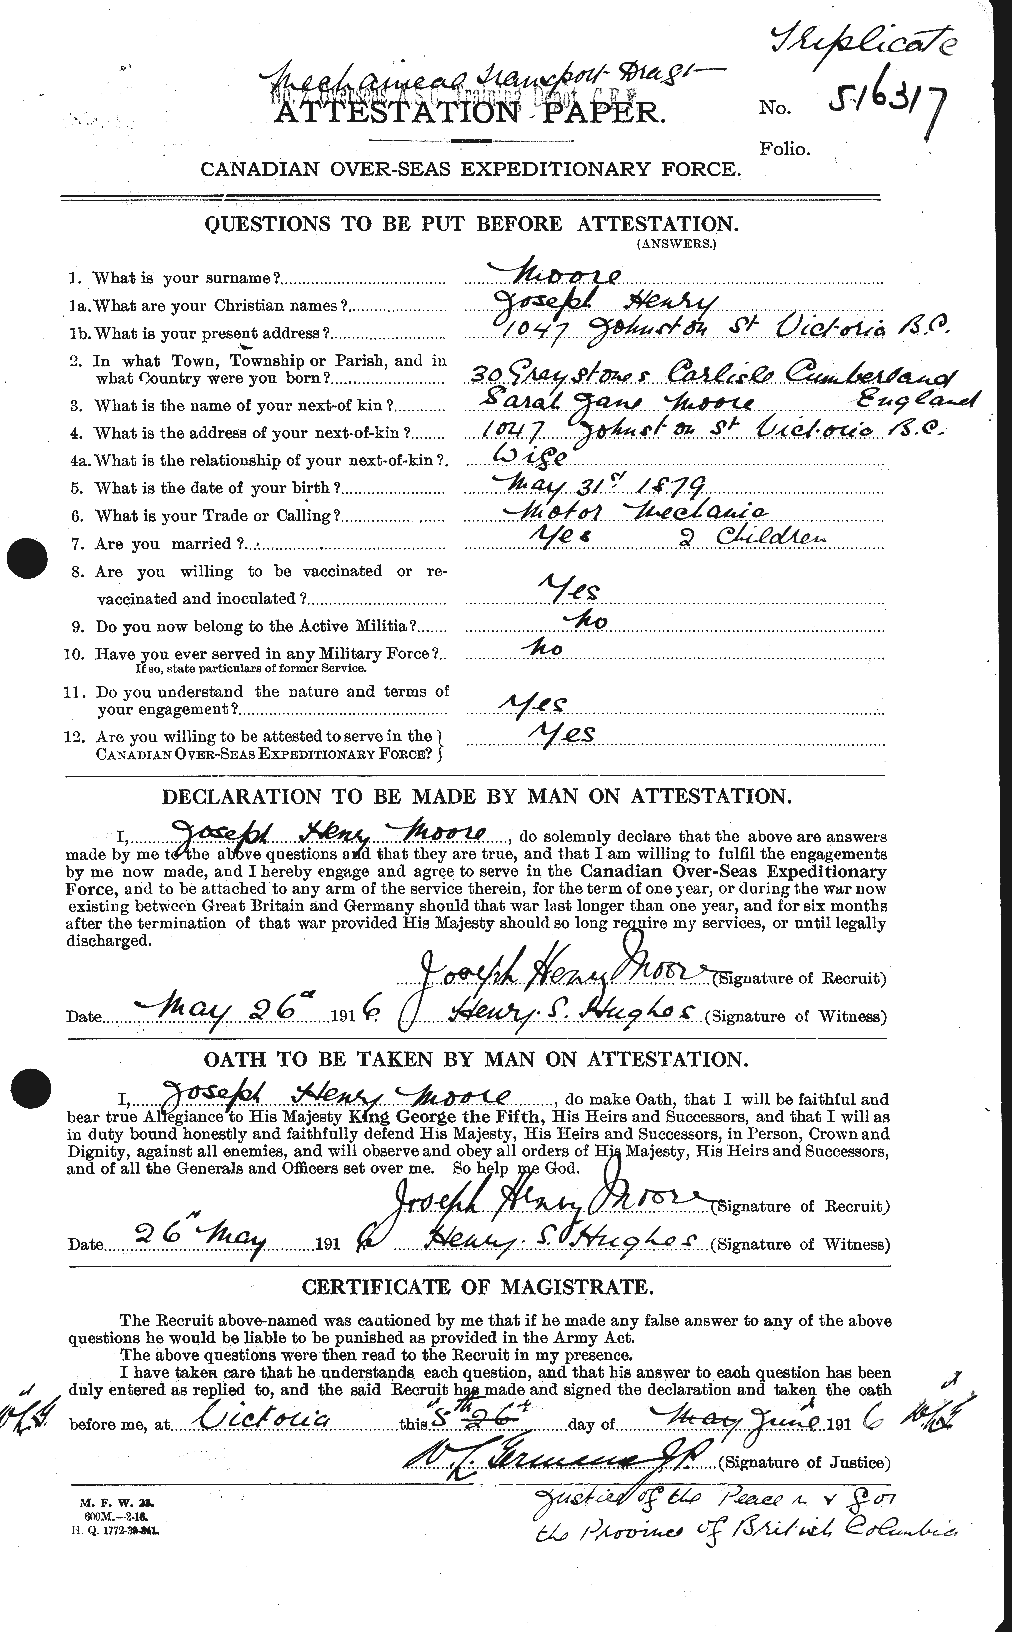 Personnel Records of the First World War - CEF 503371a